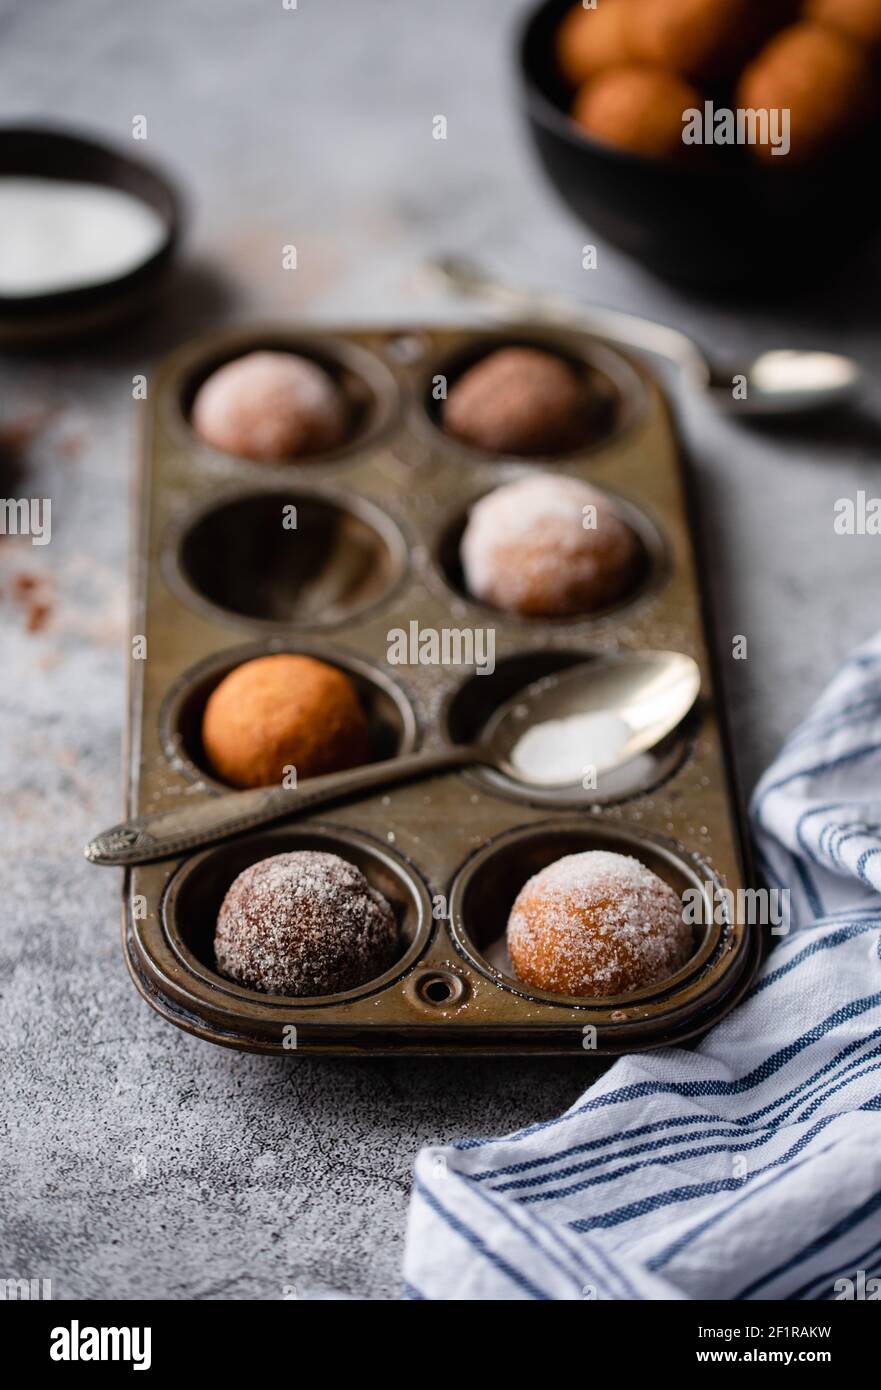 Close up of donut holes covered in sugar in a baking tin. Stock Photo